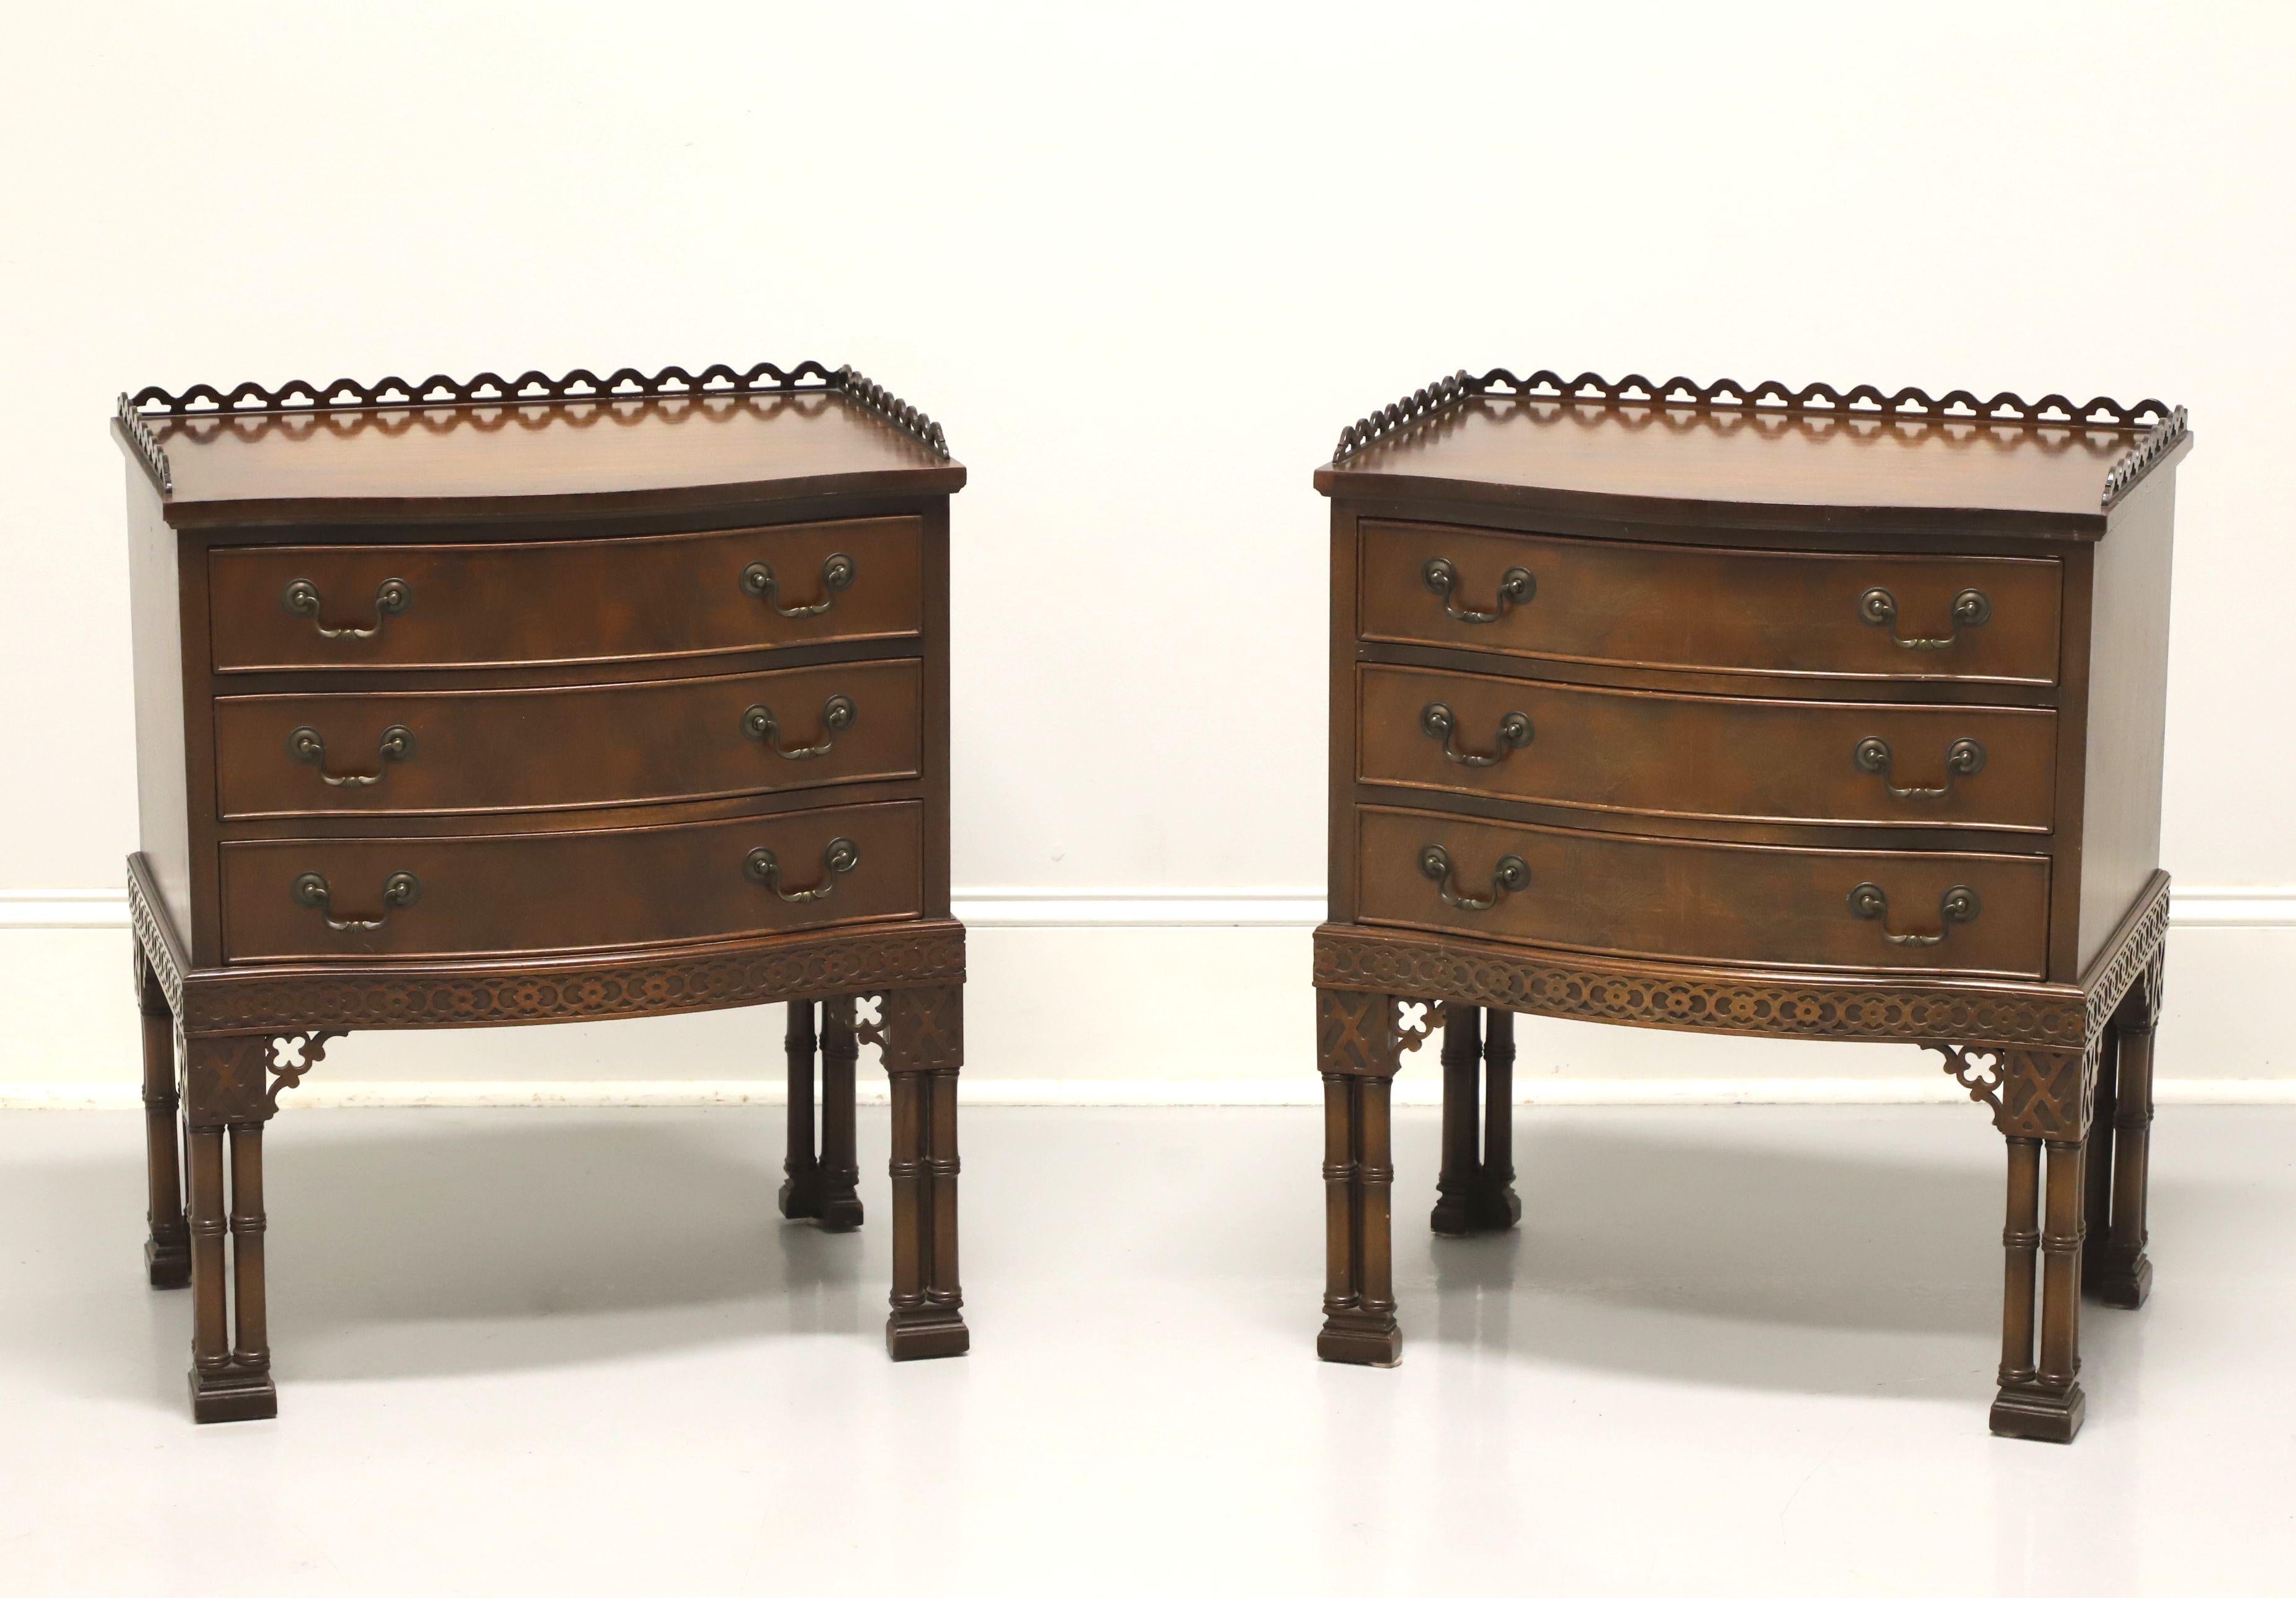 WARSAW MFG Mahogany Chinese Chippendale Nightstands / Bedside Chests - Pair 6